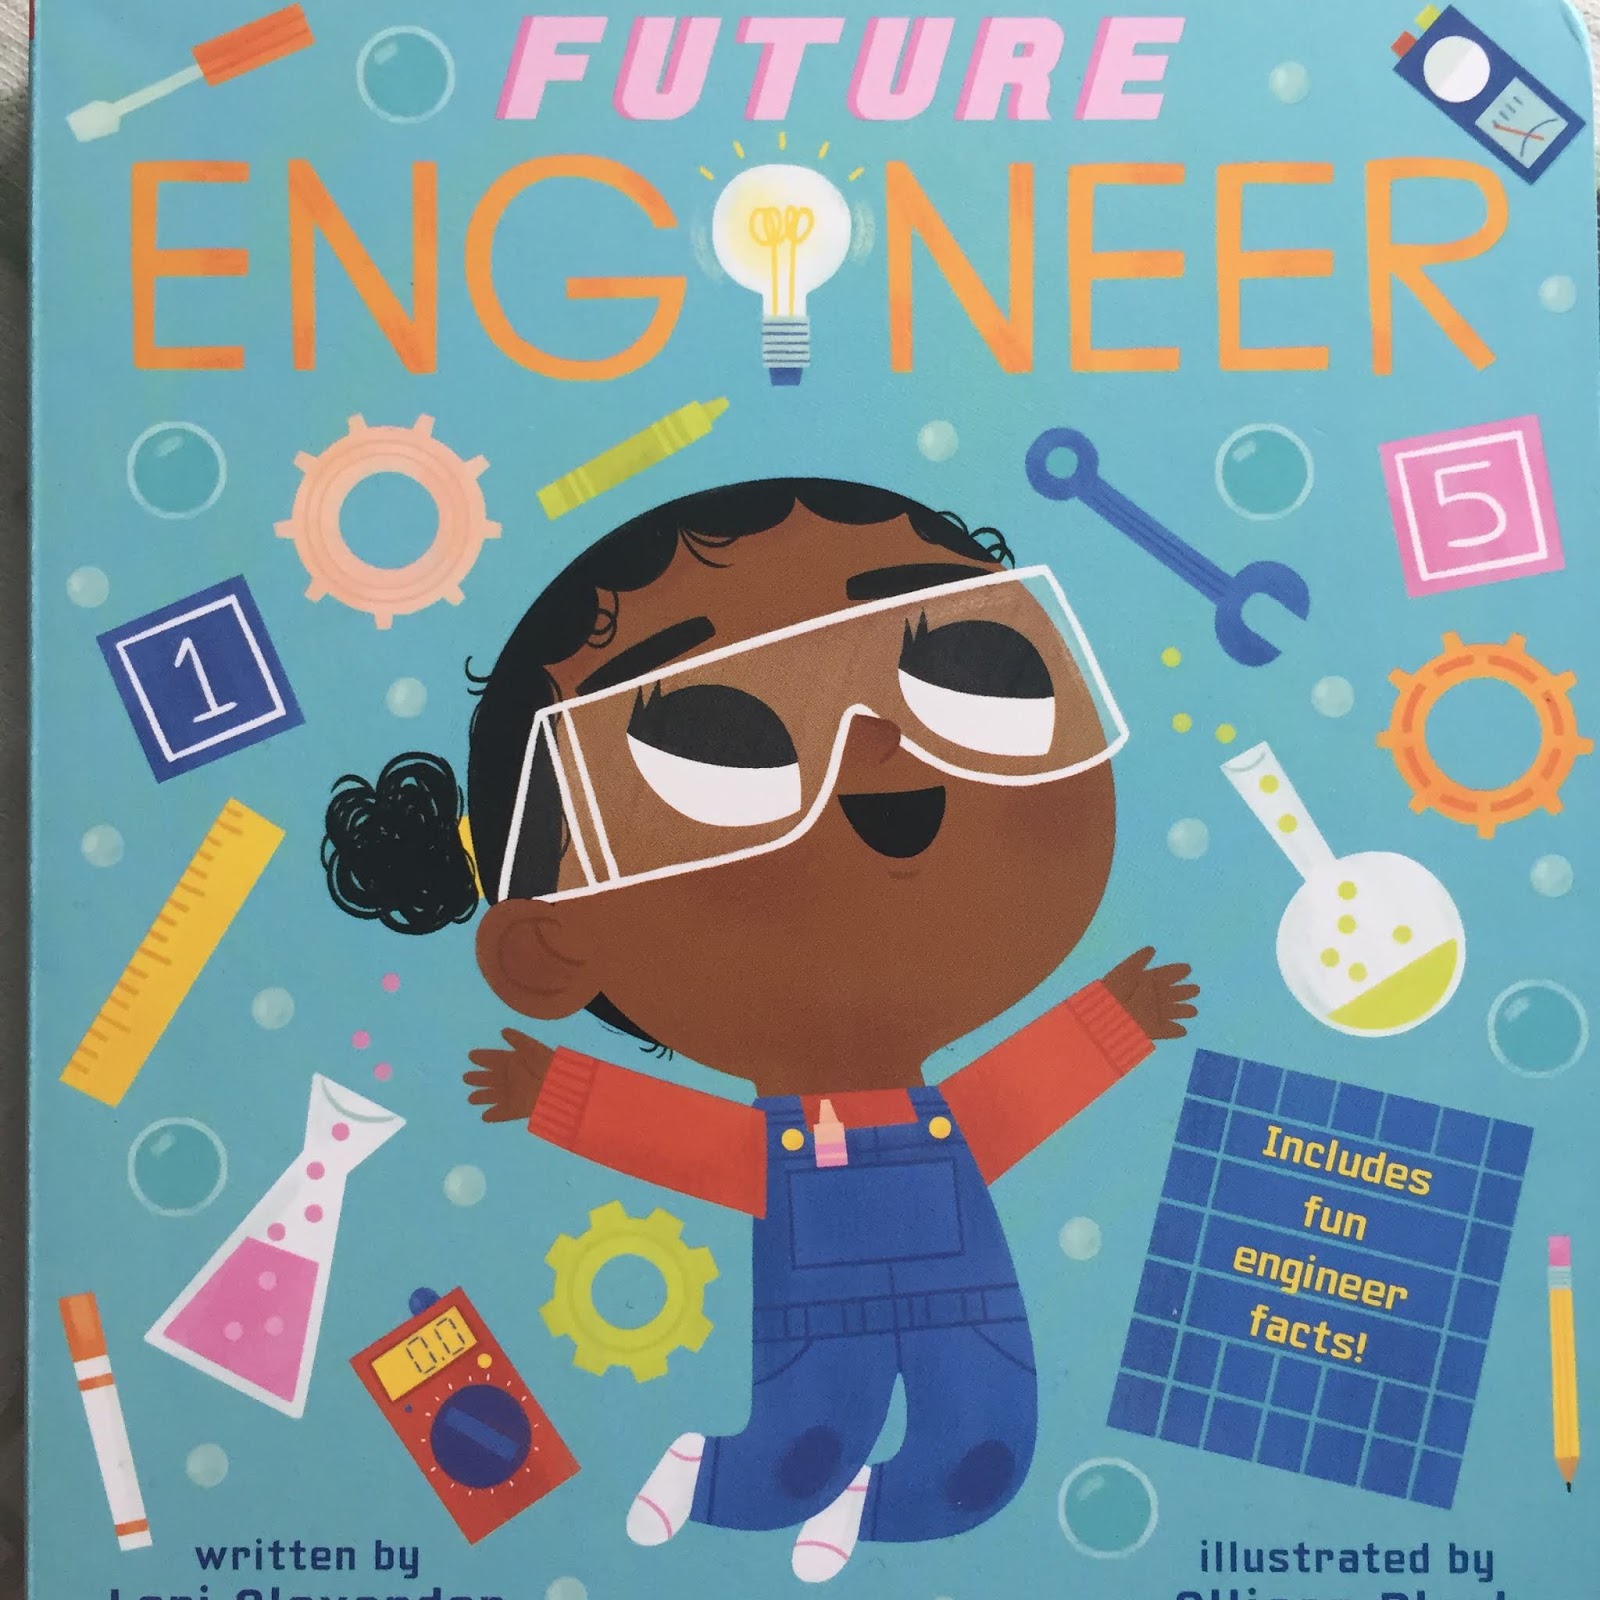 My future book. Future book. Engineering every child is an Engineer of the Future 6+. Engineering every child is an Engineer of the Future. The child striving for the Future books.